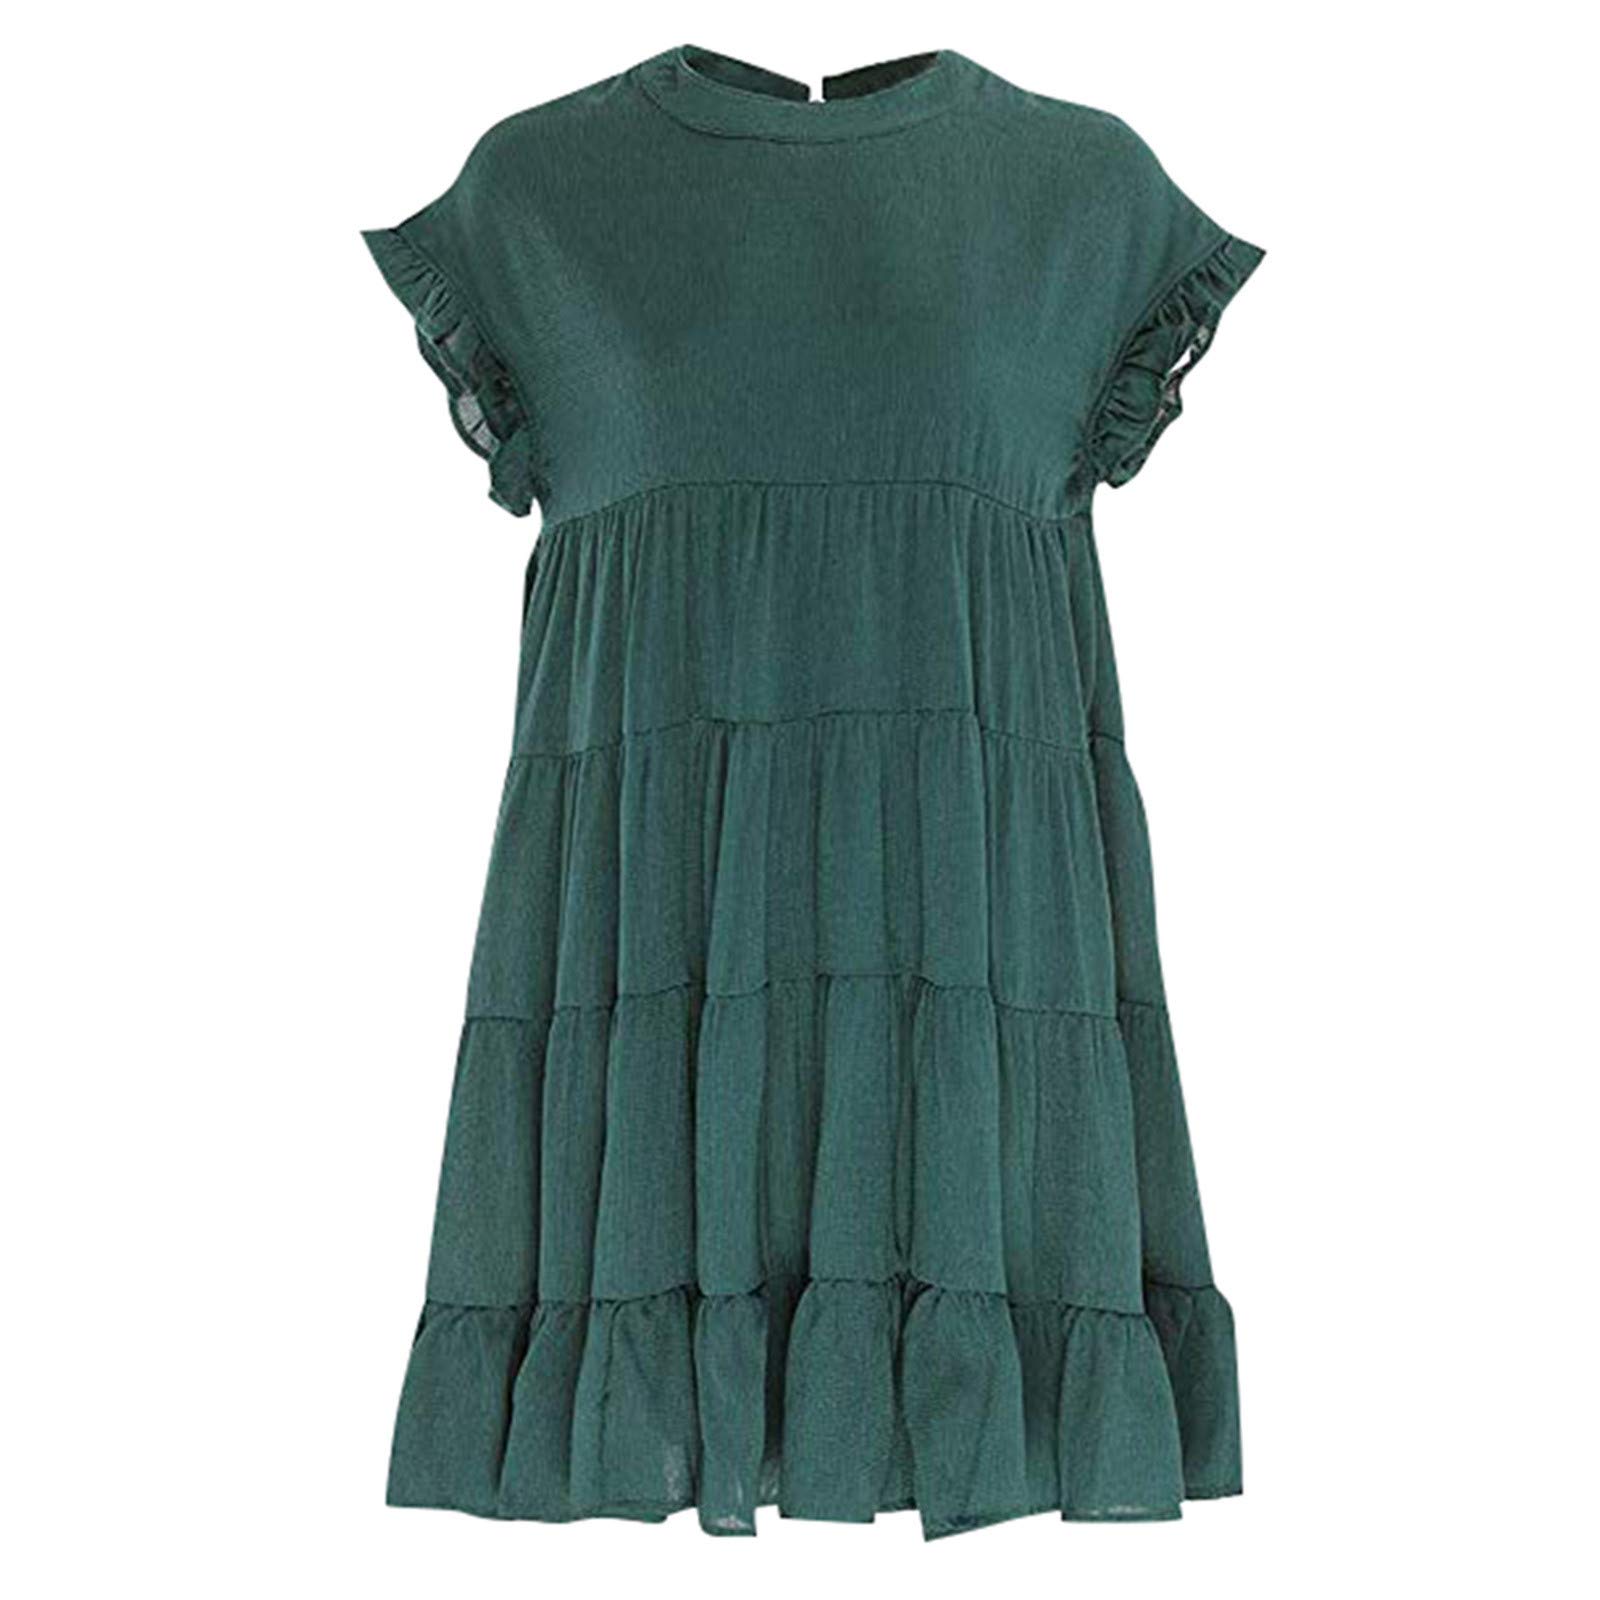 2023 Women's Ruffle Sleeve Round Neck Mini Dress Summer Casual Solid Loose Short Flowy Pleated Dress Swing Party Dress